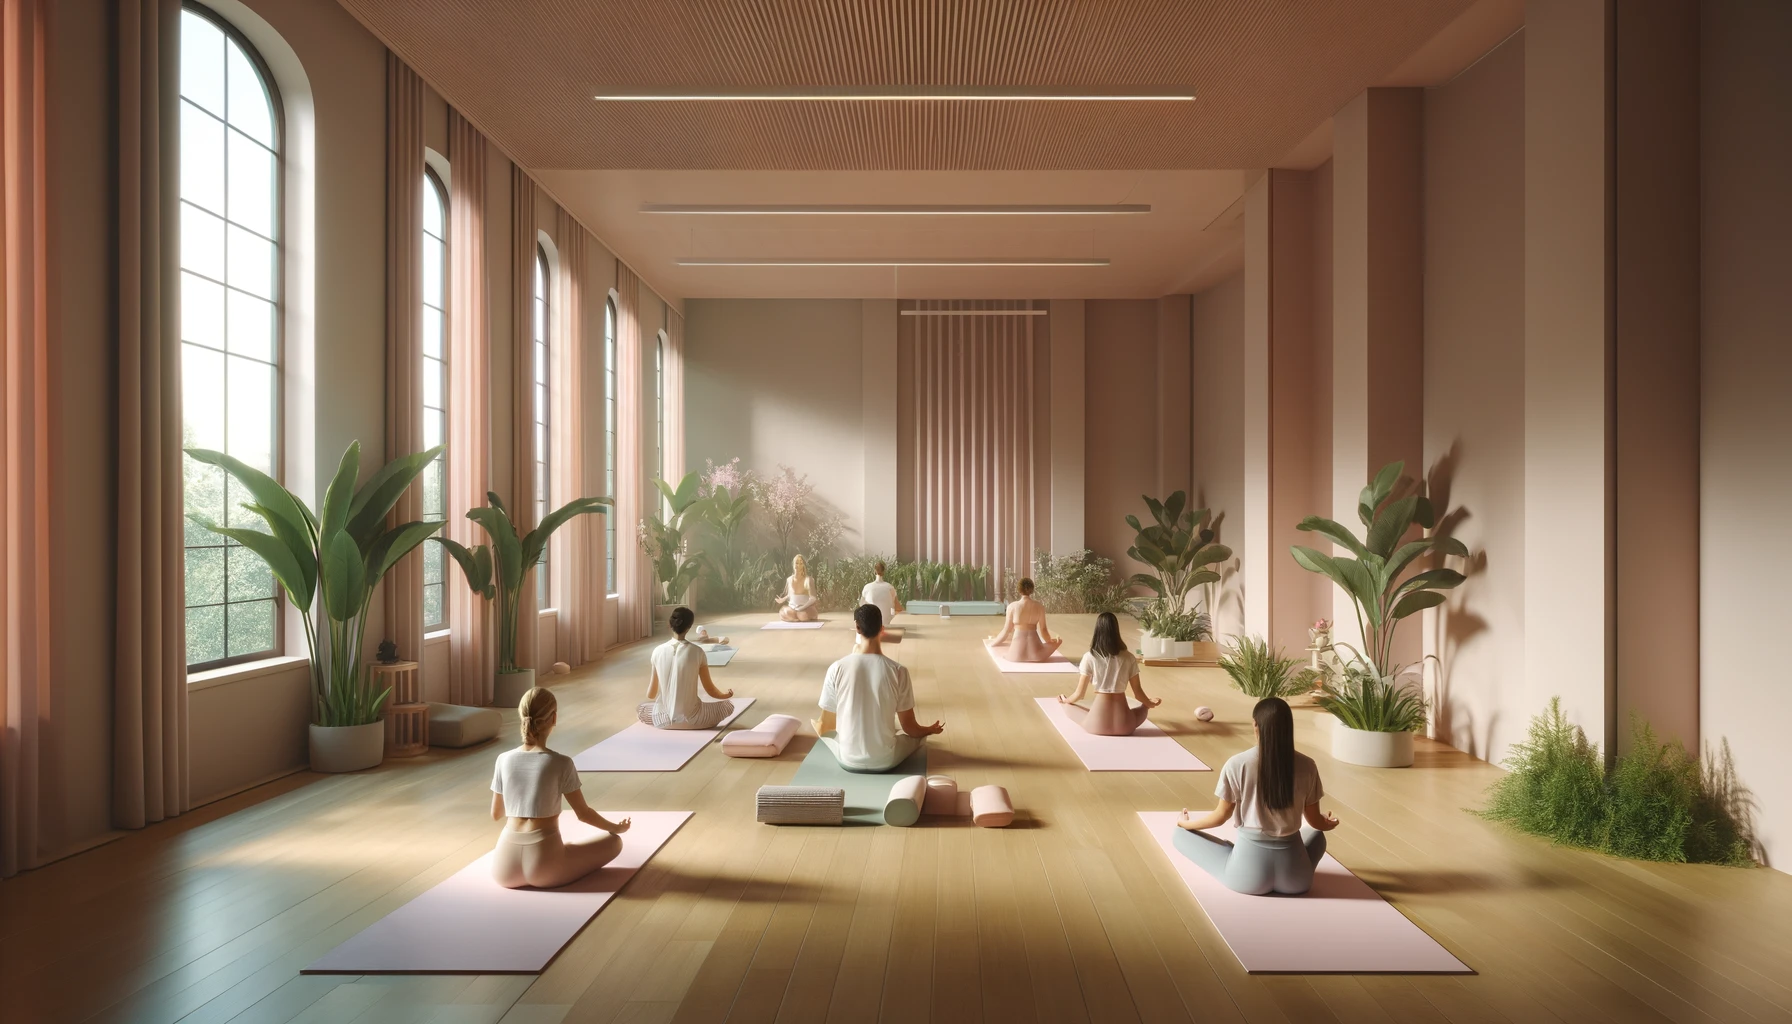 A tranquil yoga studio with walls painted in shades of pink, featuring large windows that allow natural light to illuminate the bamboo flooring. The room hosts a diverse group of individuals engaged in various yoga poses on pastel-colored mats, surrounded by lush green plants, creating a serene and focused environment.